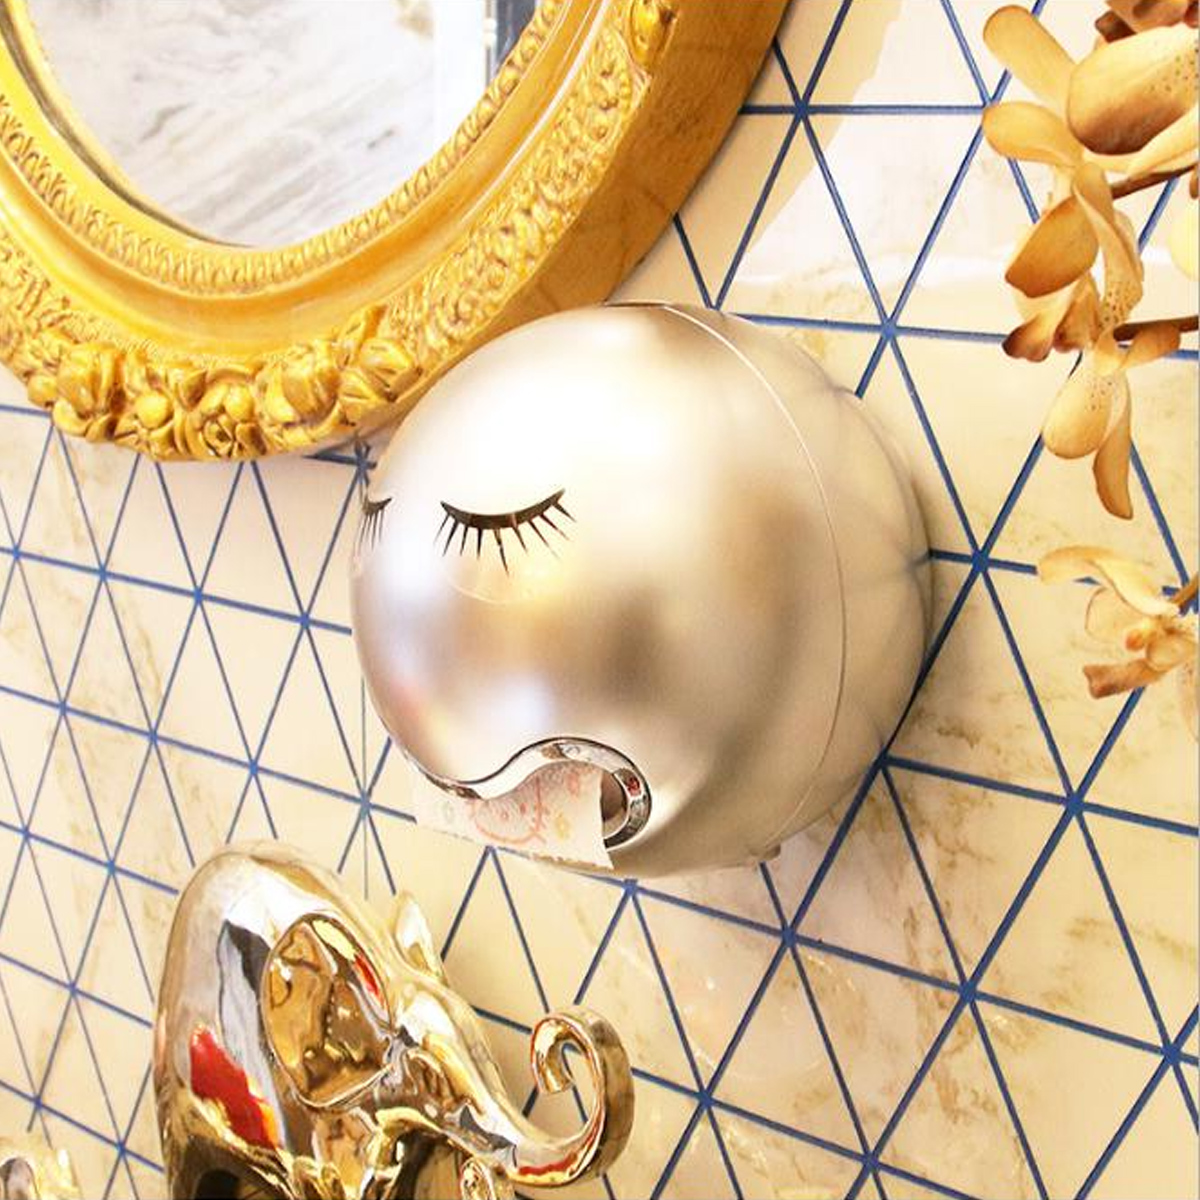 Bathroom-Ball-Shaped-Face-Wall-Mounted-Tissue-Holder-Toilet-Roll-Paper-Box-Paper-Shelf-Holder-1634911-9